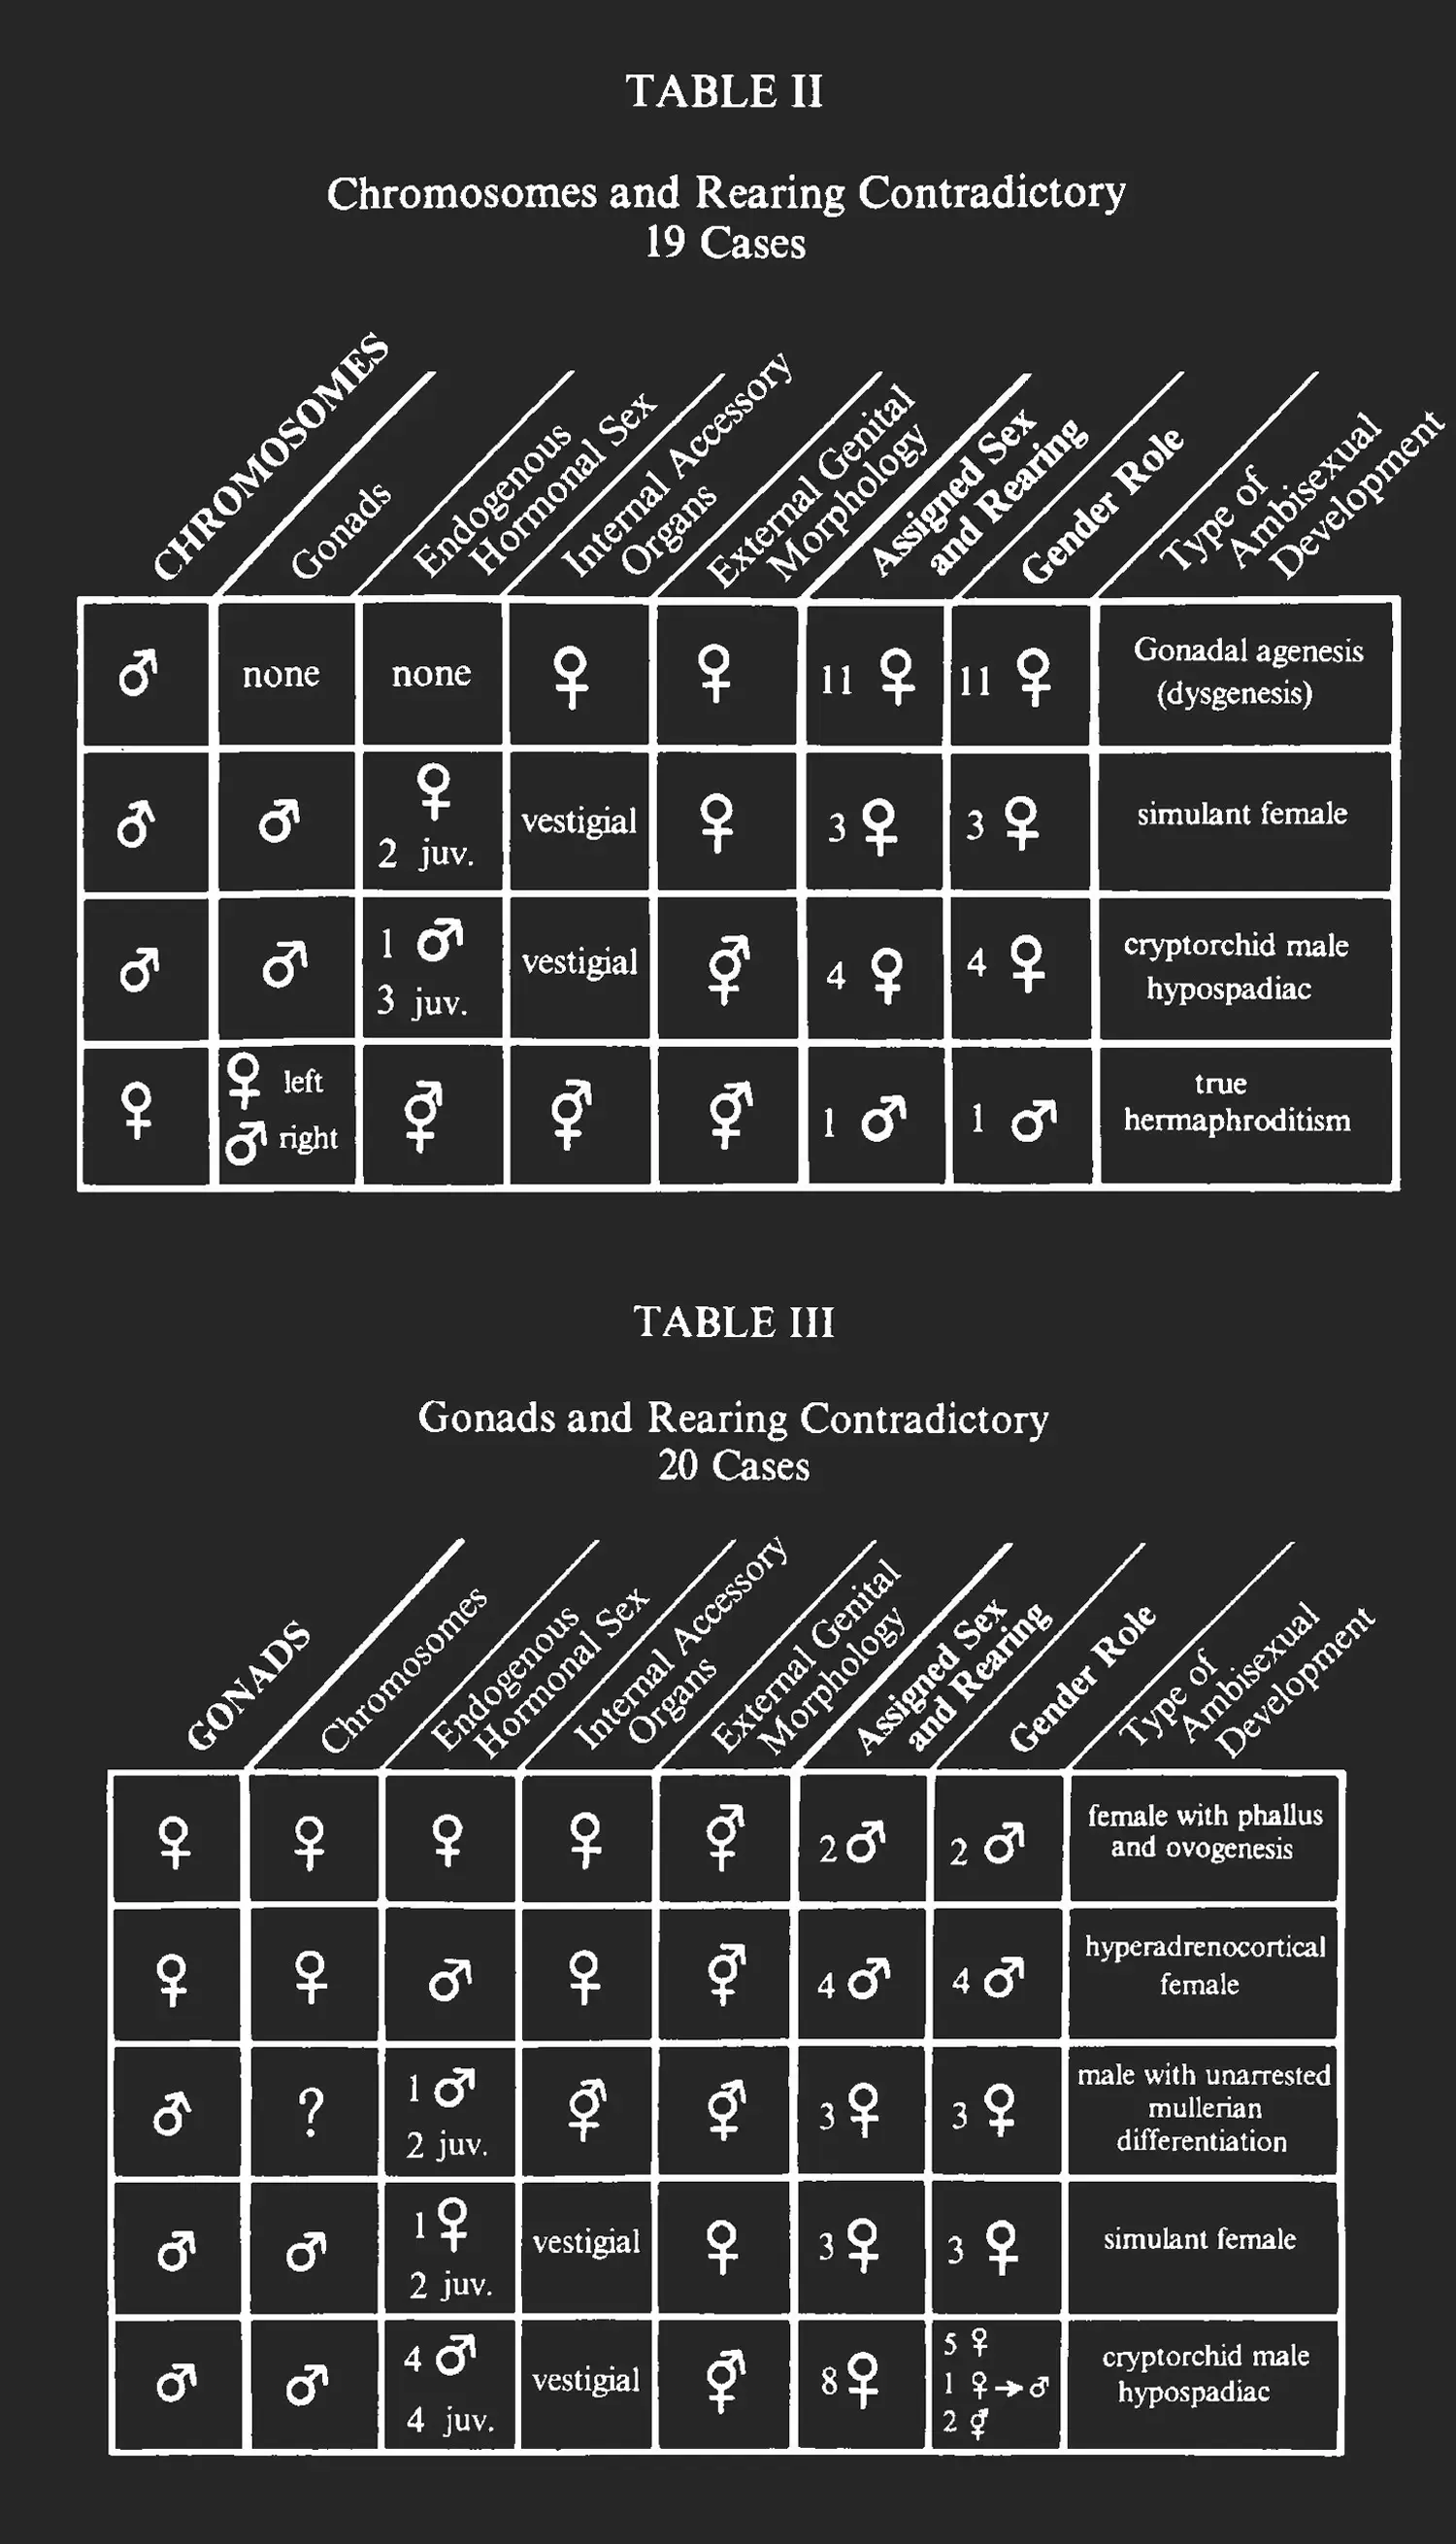 Two Tables. One is titled “Chromosomes and Rearing Contradictory; 19 cases” and the other “Gonads and Rearing Contradictory; 20 cases”.